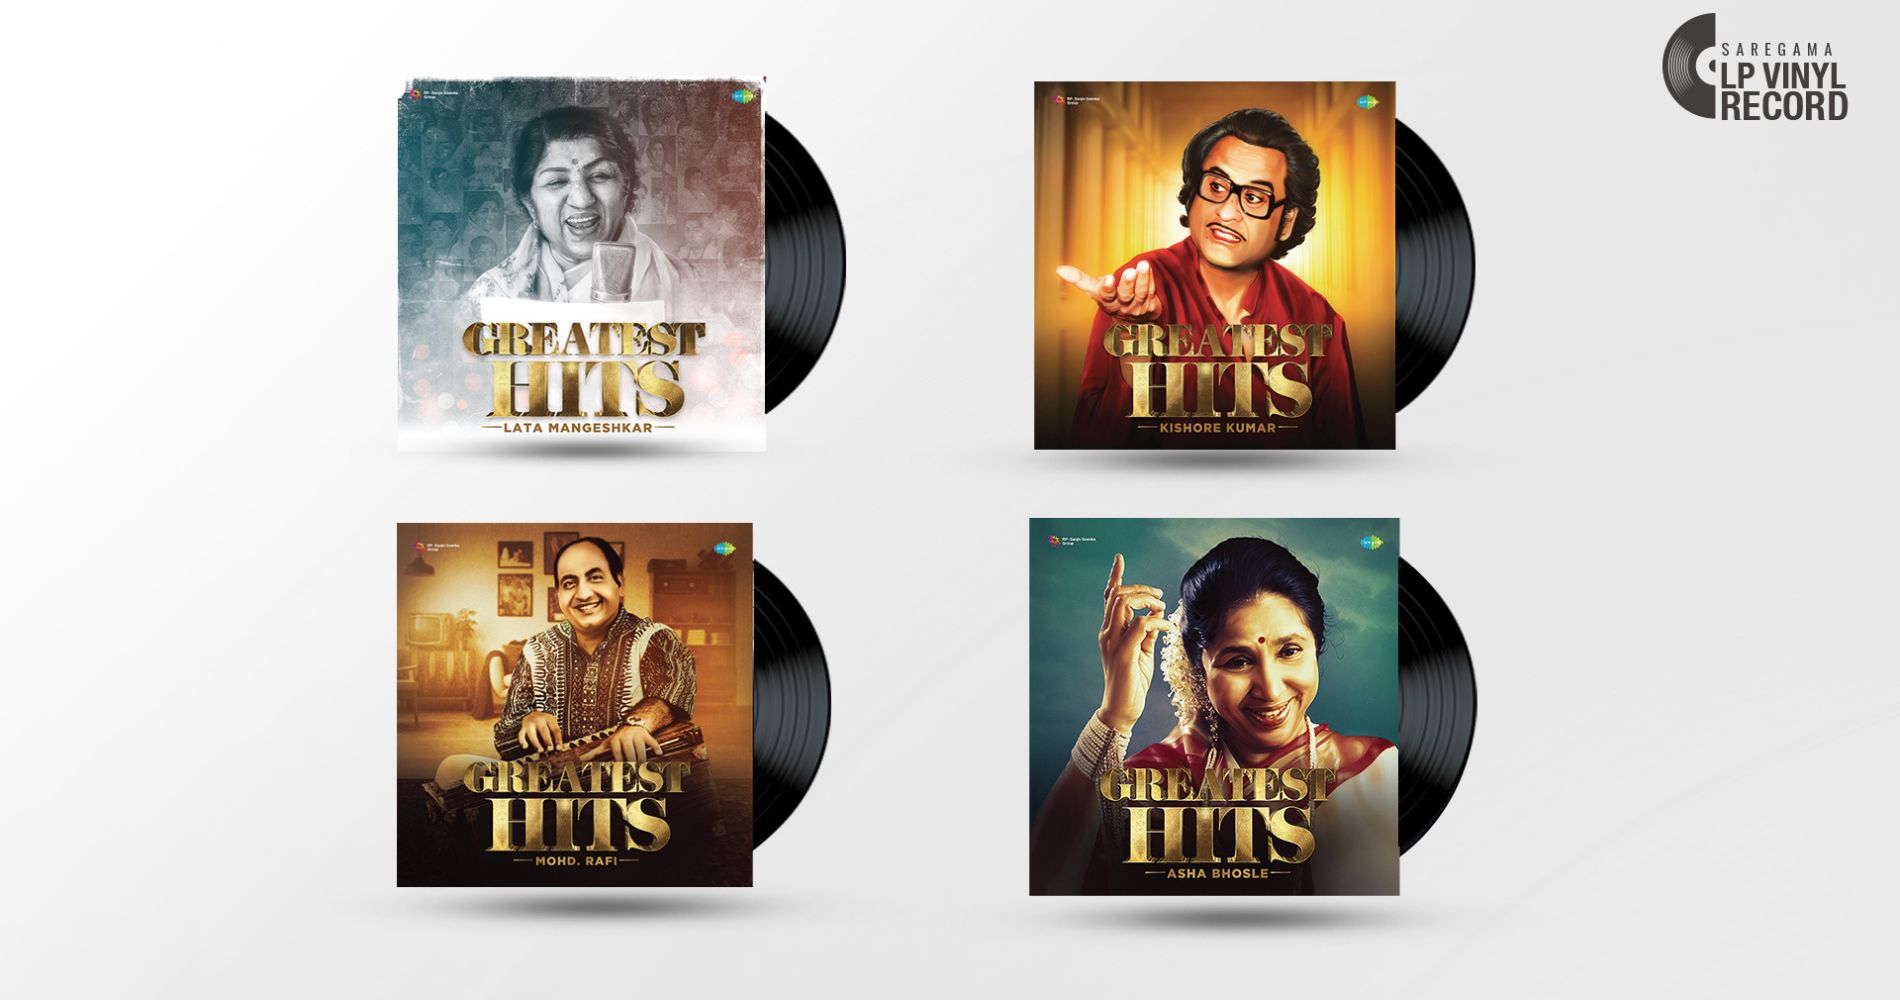 Saregama Brings Back The Old World Charm With A Collection of Vinyls